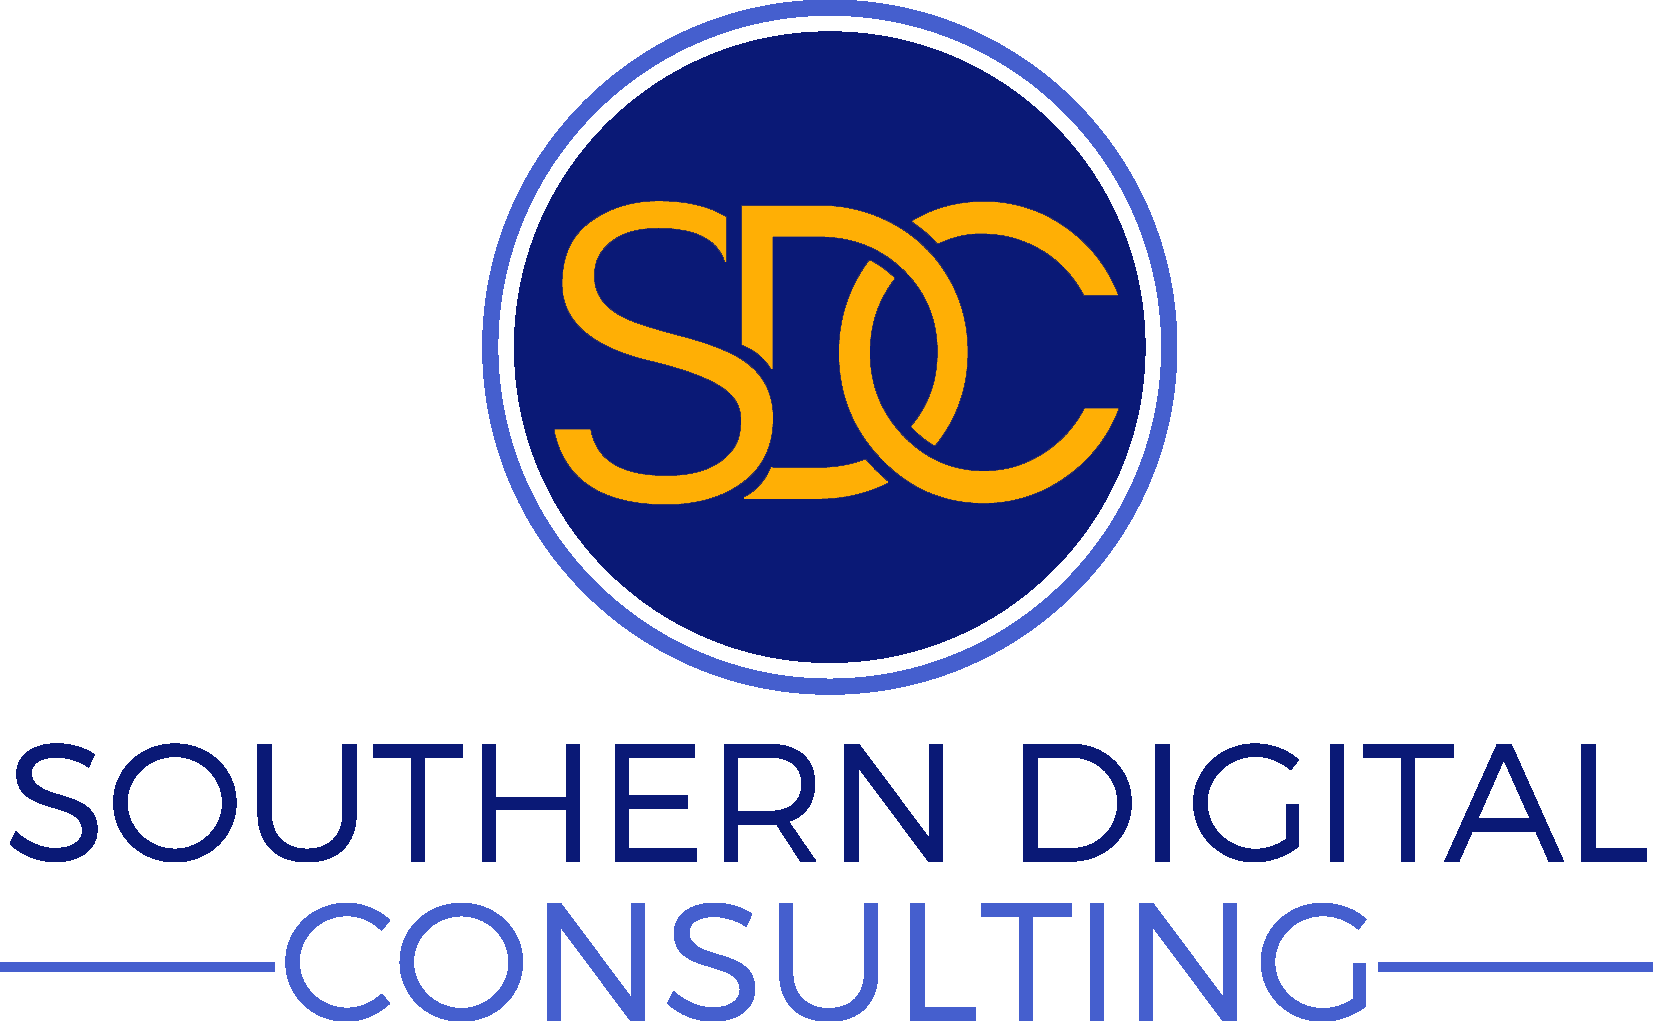 Website developed by Southern Digital Consulting